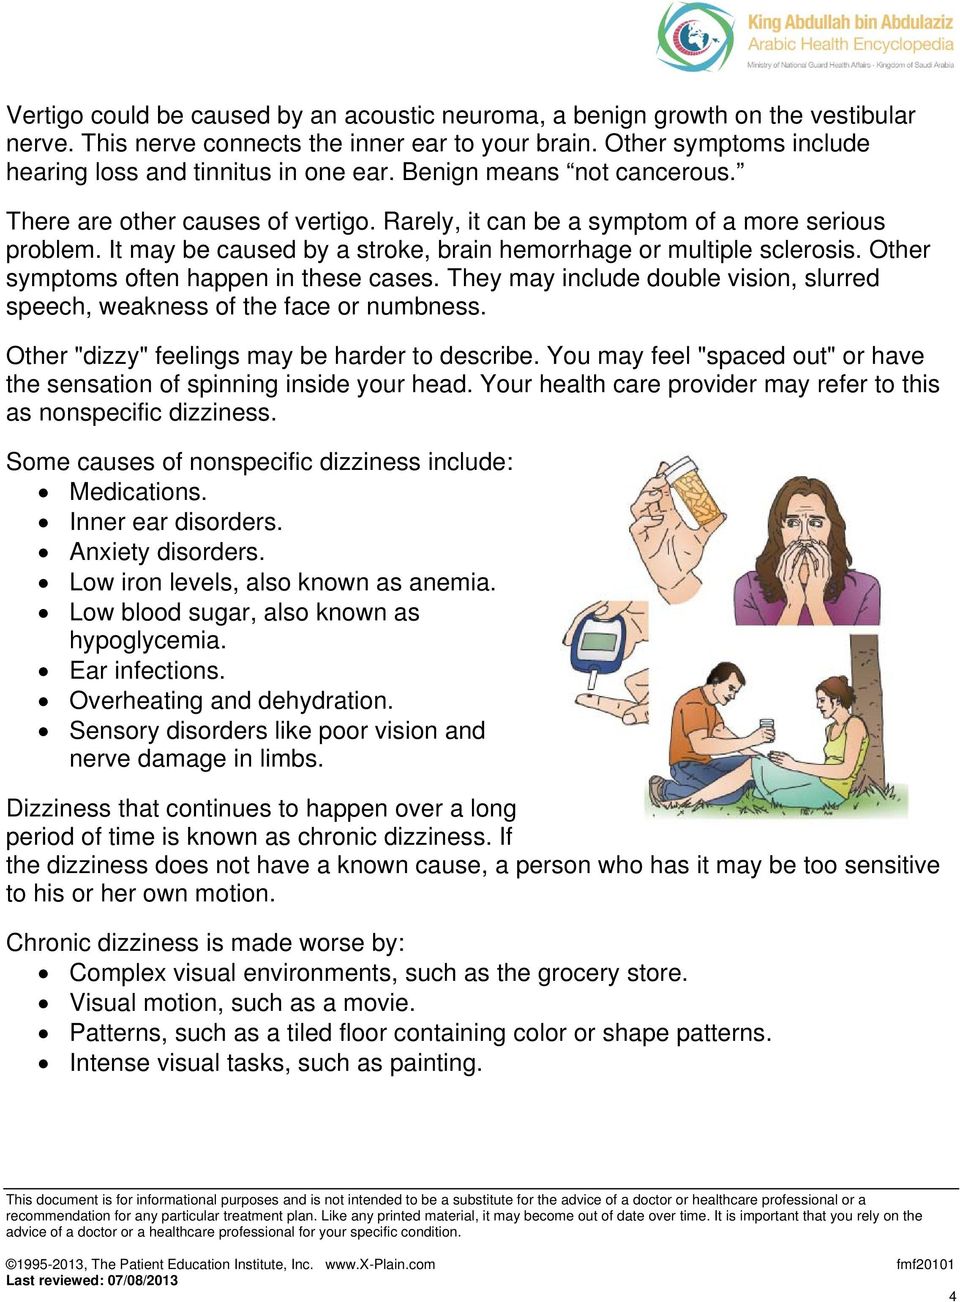 Other symptoms often happen in these cases. They may include double vision, slurred speech, weakness of the face or numbness. Other "dizzy" feelings may be harder to describe.